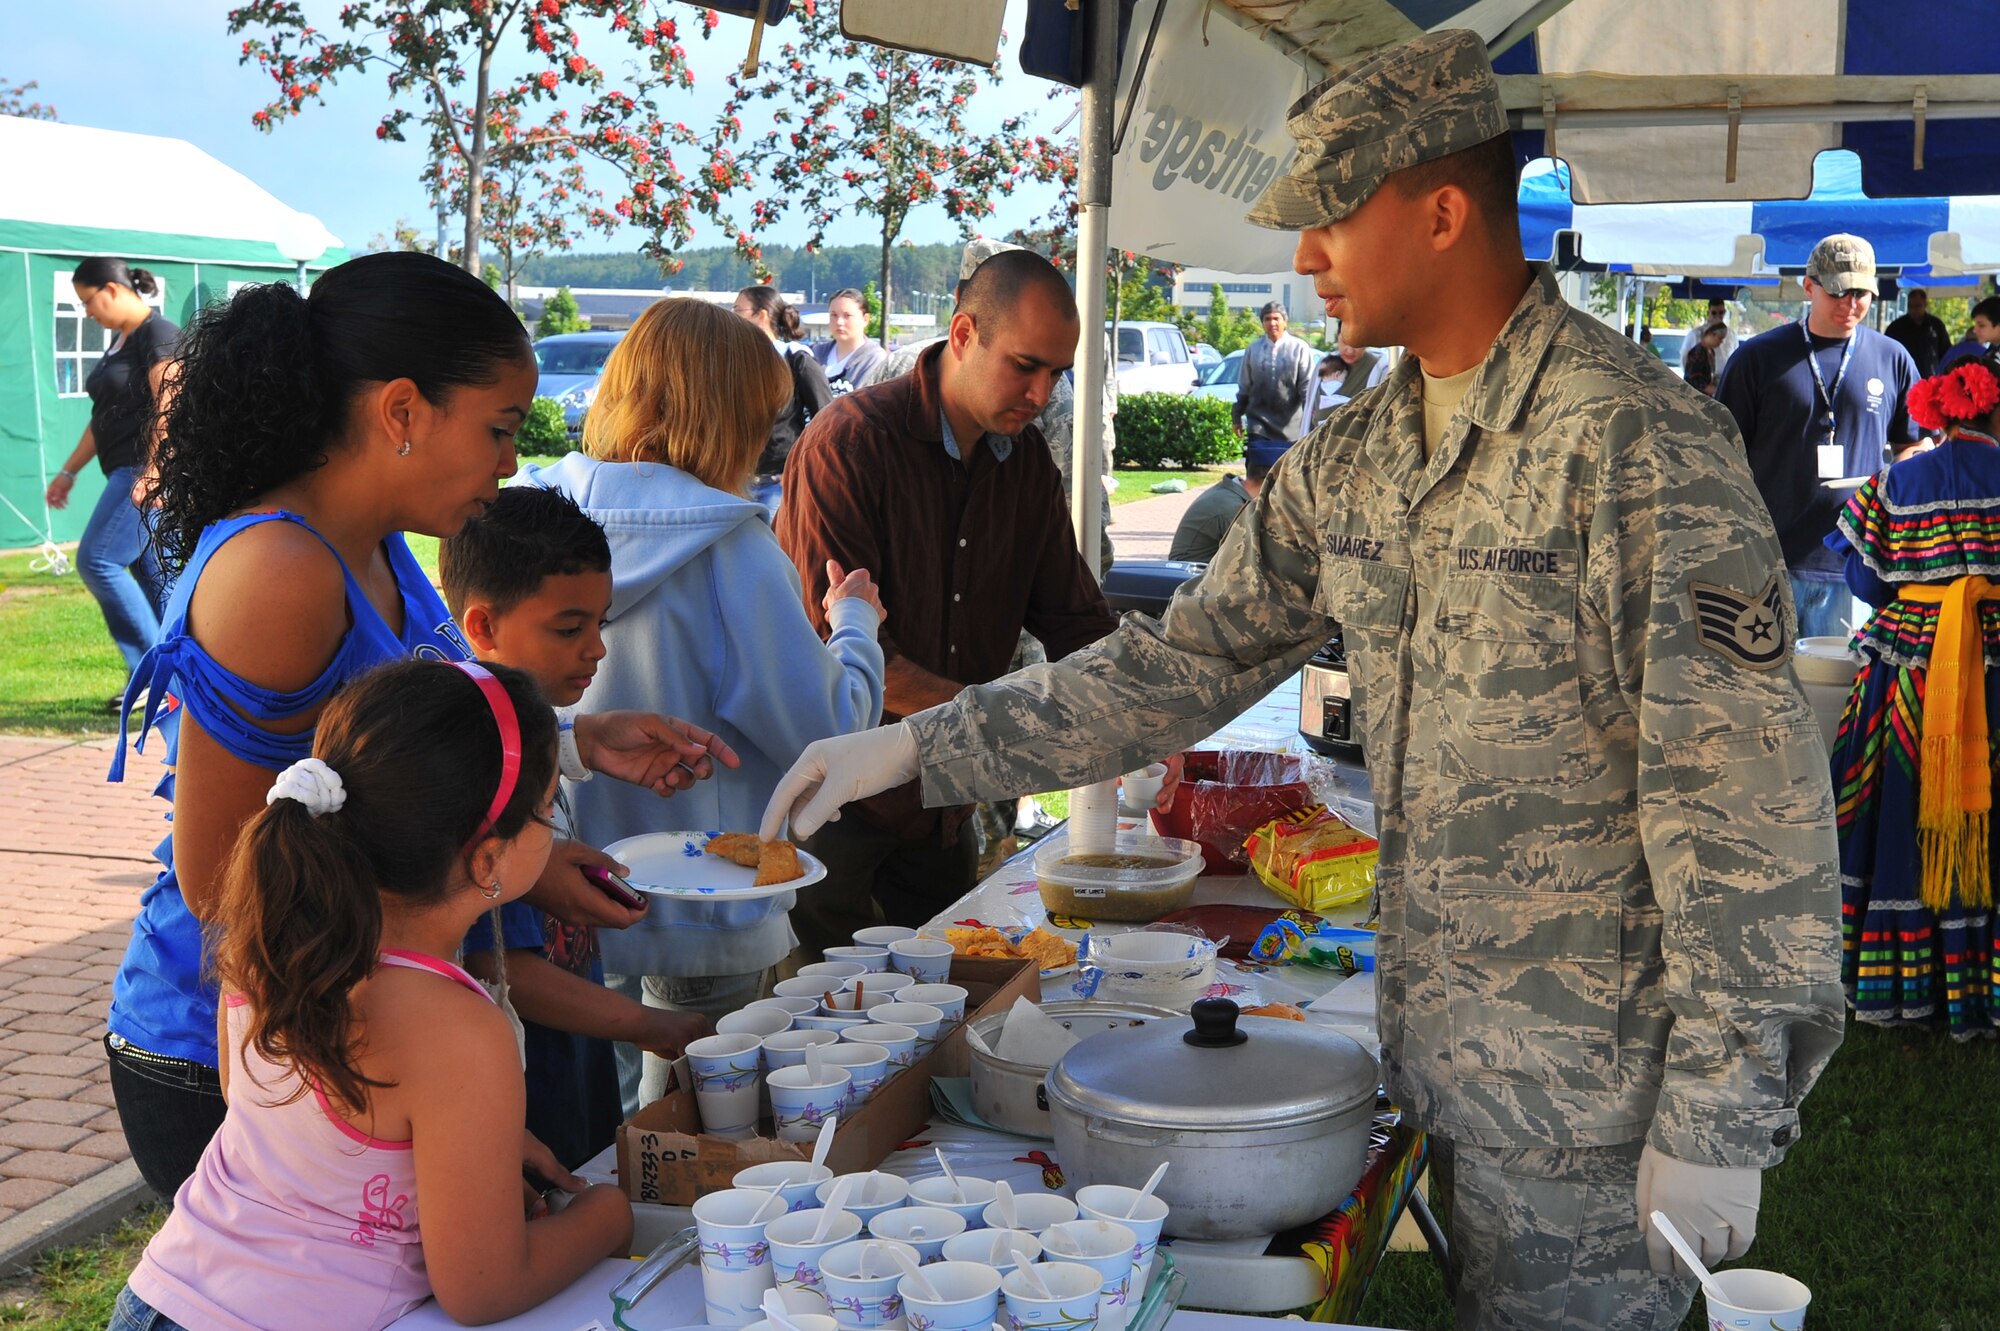 SPANGDAHLEM AIR BASE, Germany – Staff Sgt. Joseph Suarez, 52nd Medical Operations Squadron, passes out food samples at the Hispanic heritage booth during Diversity Day festivities outside Club Eifel here Aug. 25. Diversity Day showcased numerous attractions and booths displaying cultural and ethnic diversity among Air Force service members and their families. (U.S. Air Force photo/Airman 1st Class Dillon Davis)